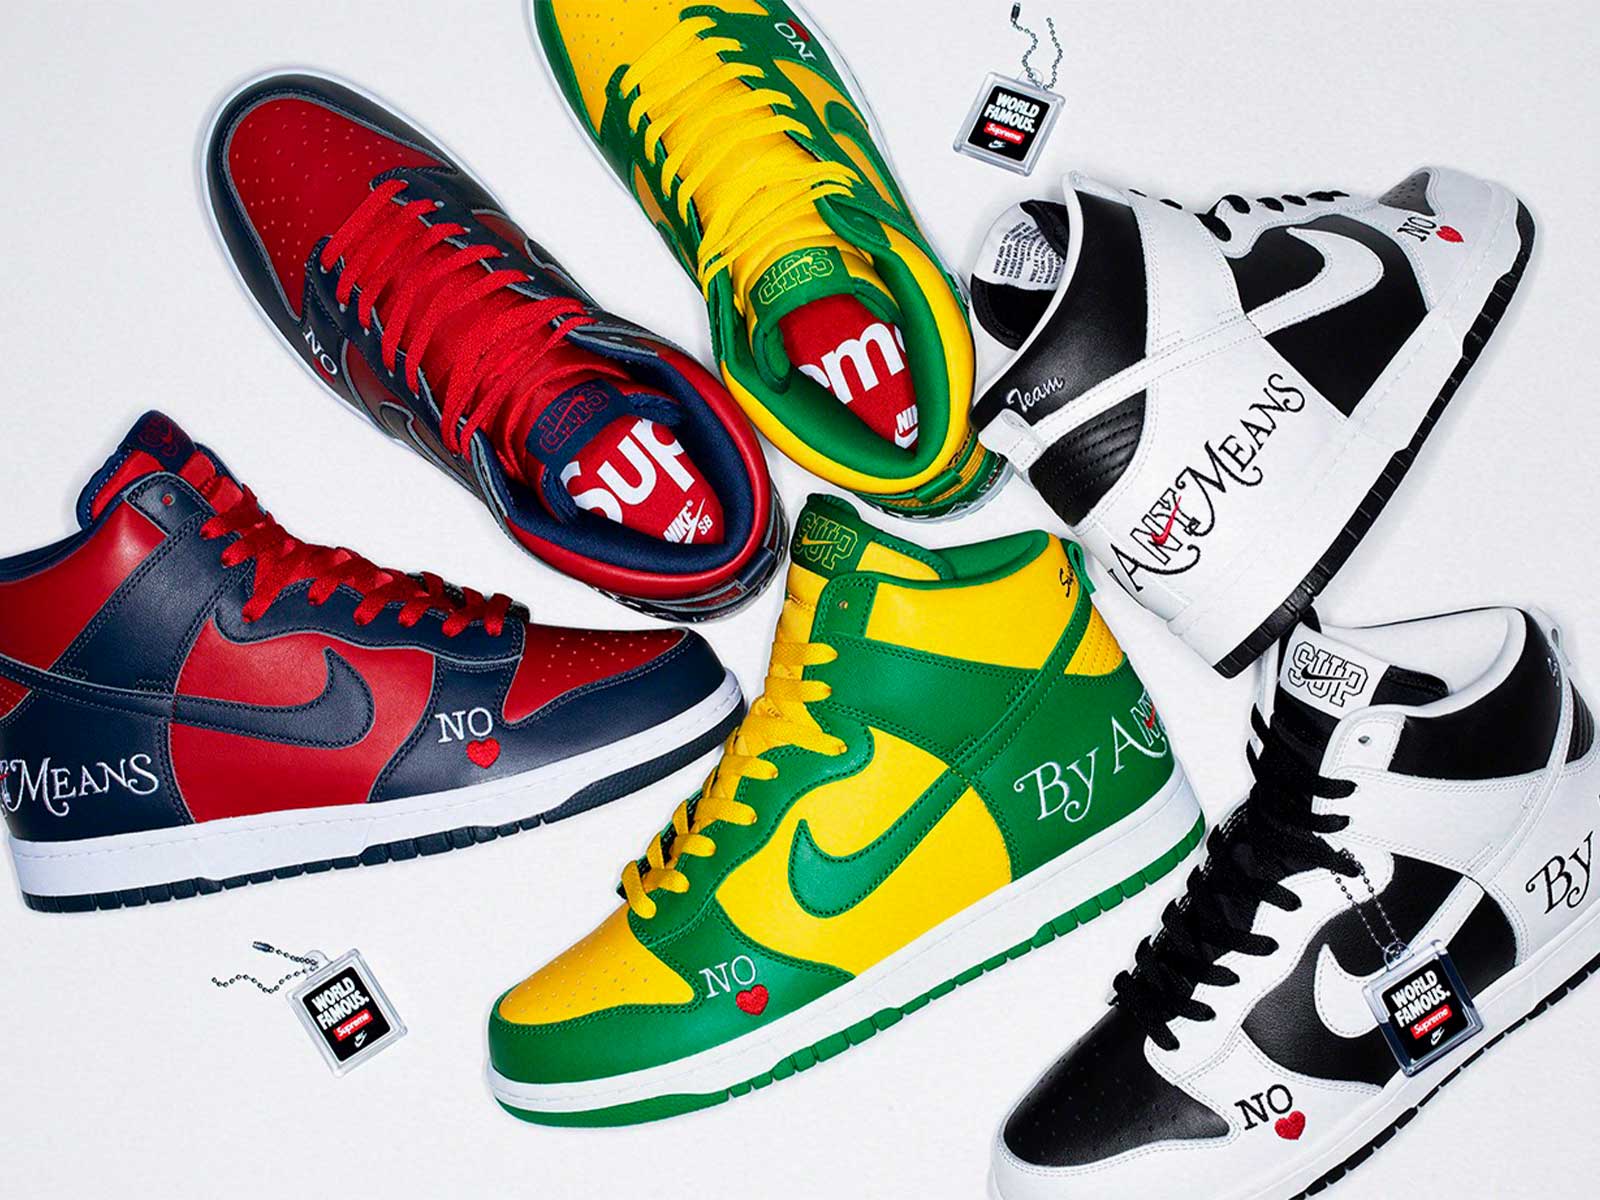 Supreme announces its next collaboration with Nike SB and versions of the Dunk High